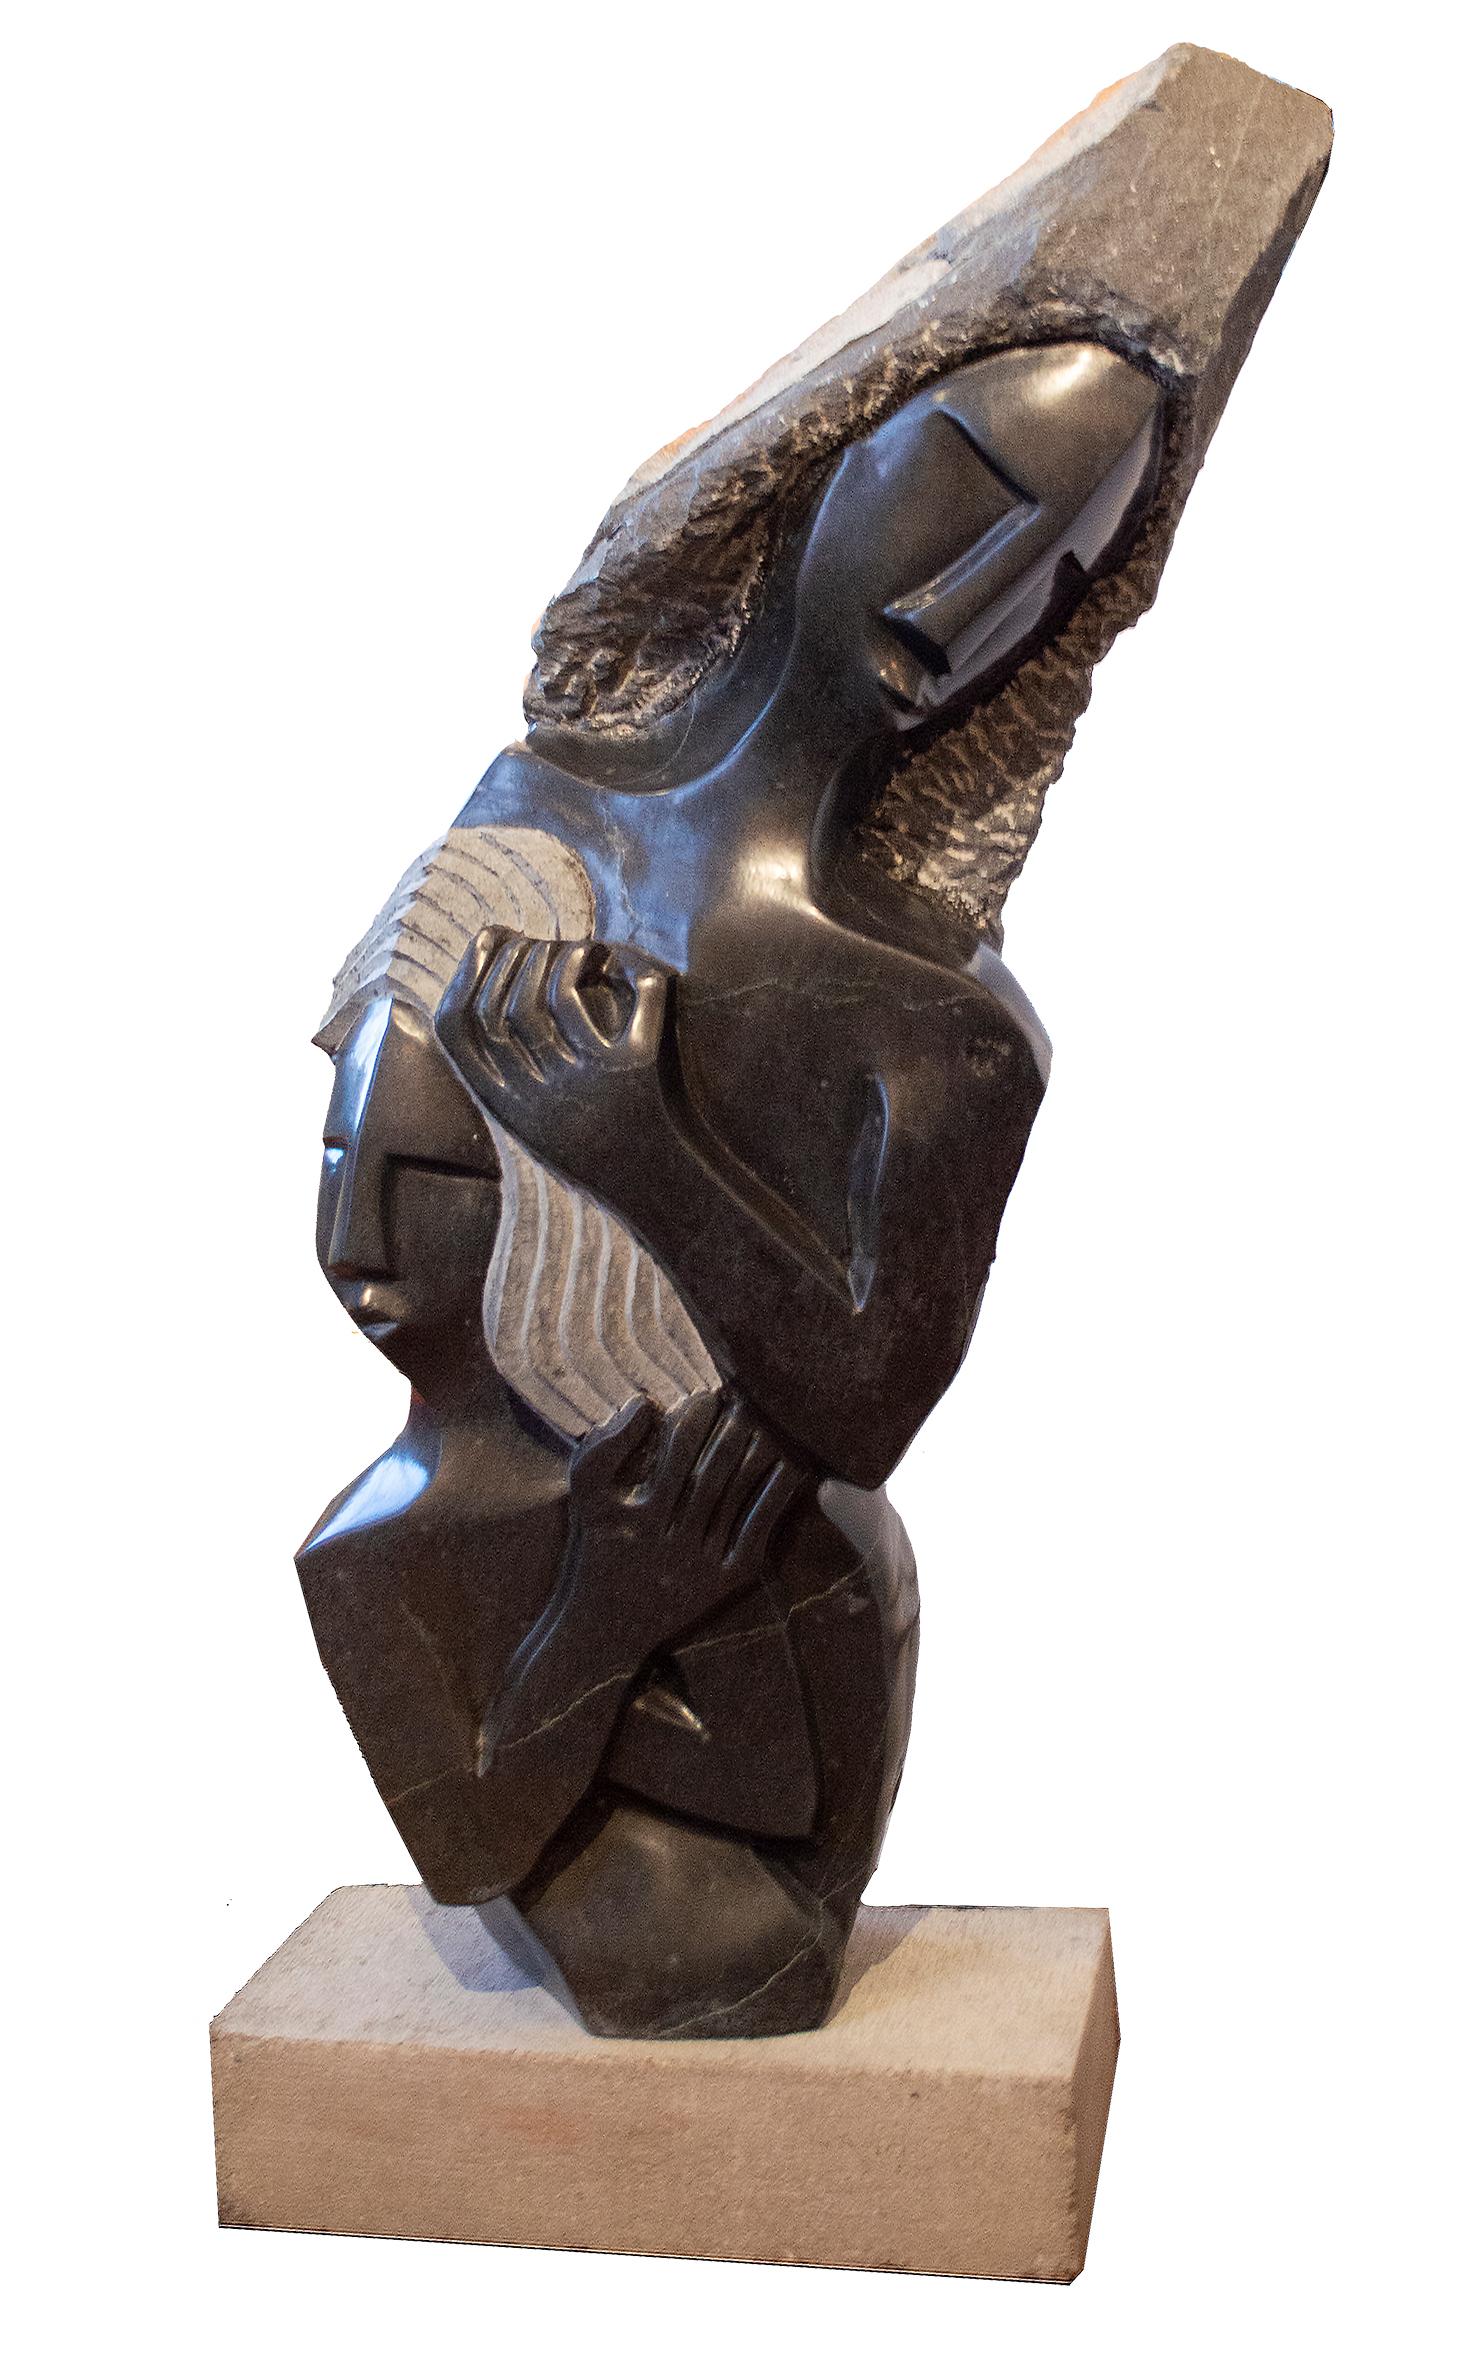 'Nursing a Firstborn' is an original stone sculpture signed by the Zimbabwean artist Munyaradzi Mukungurutse. The sculpture works with the theme of family relationships, as is so beloved of the Shona tradition of sculptors. Leaning with a sweeping